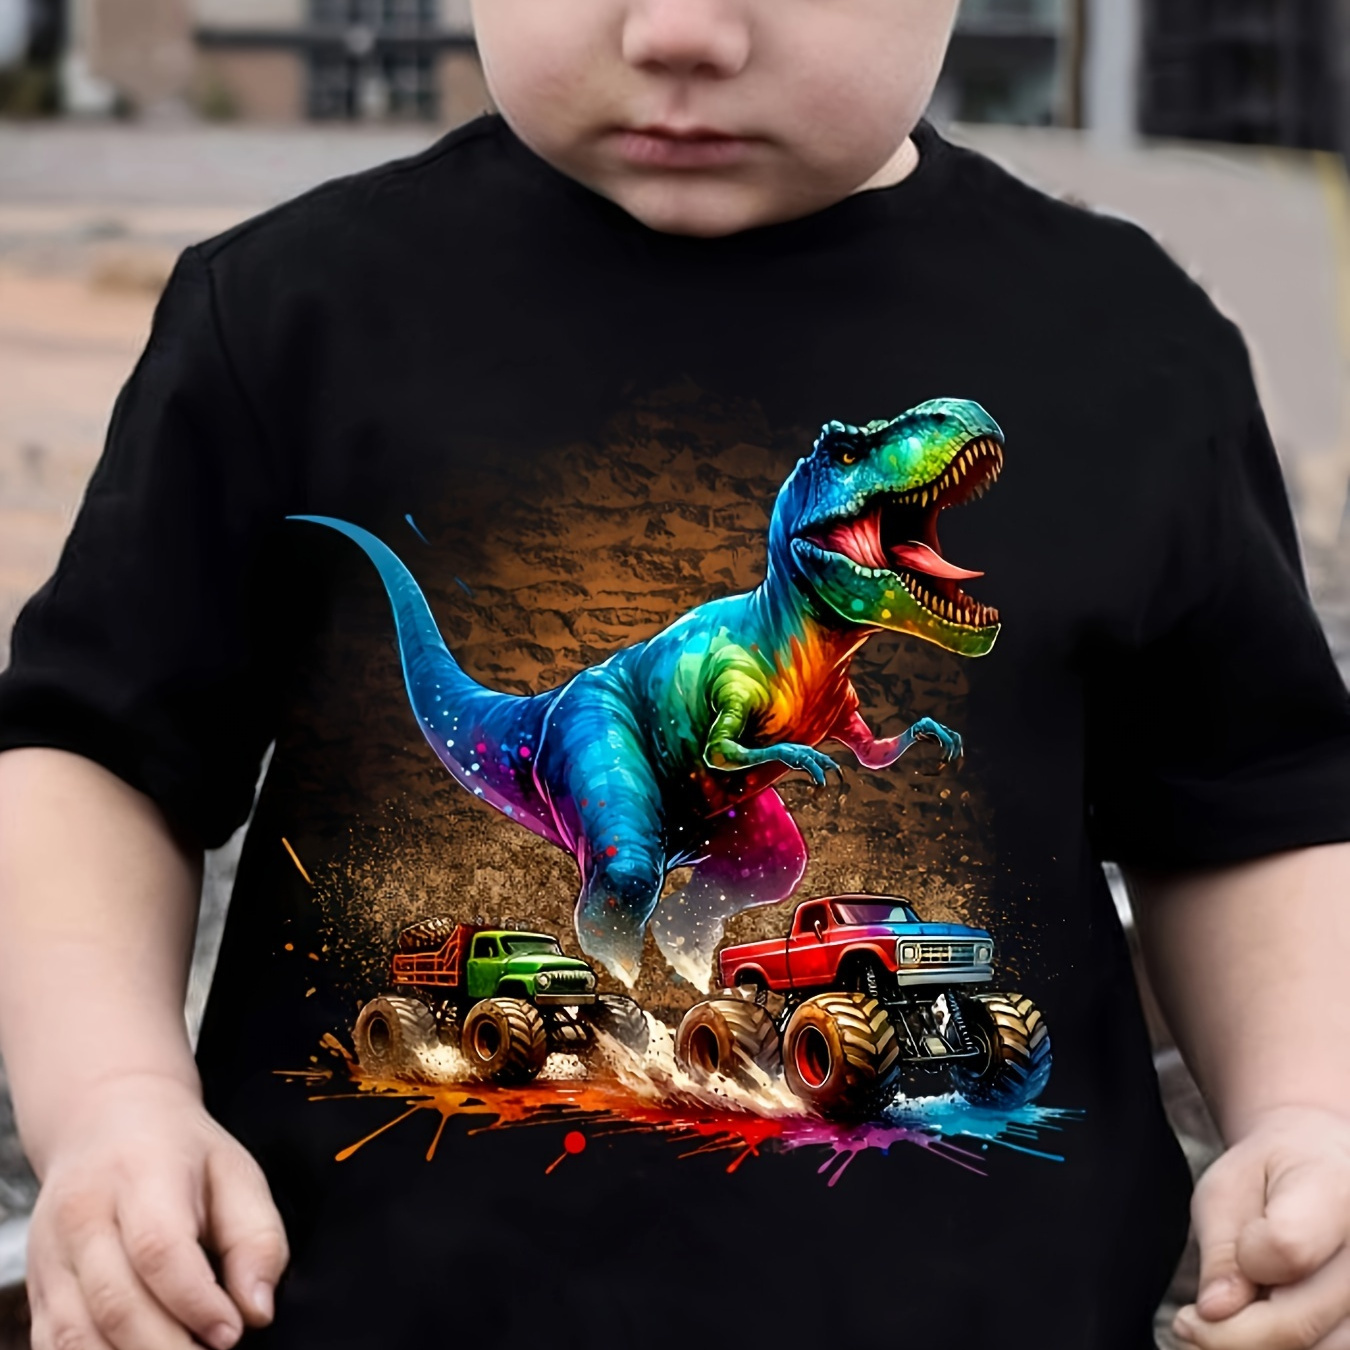 

Dinosaur & Trucks Graphic Print Tee, Boys' Casual & Trendy Crew Neck Short Sleeve T-shirt For Spring & Summer, Boys' Clothes For Outdoor Activities